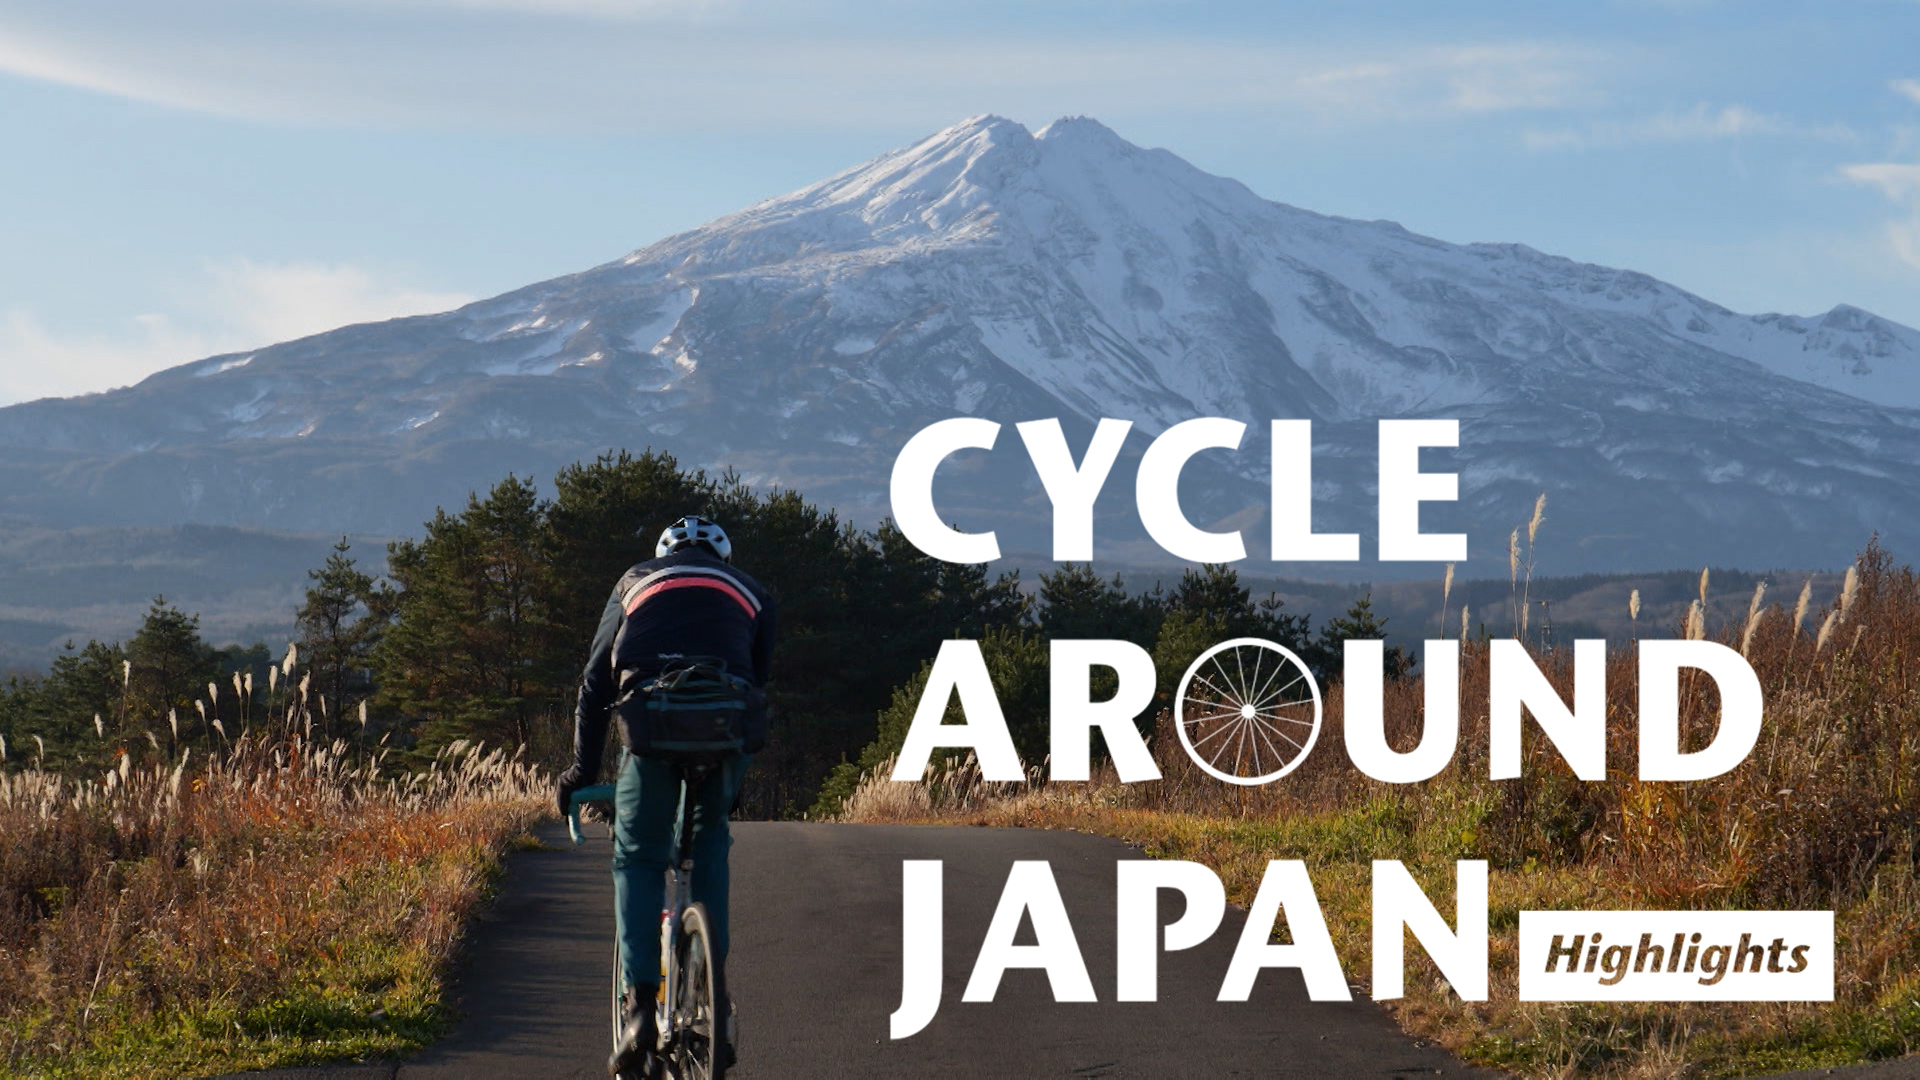 Check out Cycle Around Japan Highlights Season 5 on your local station!